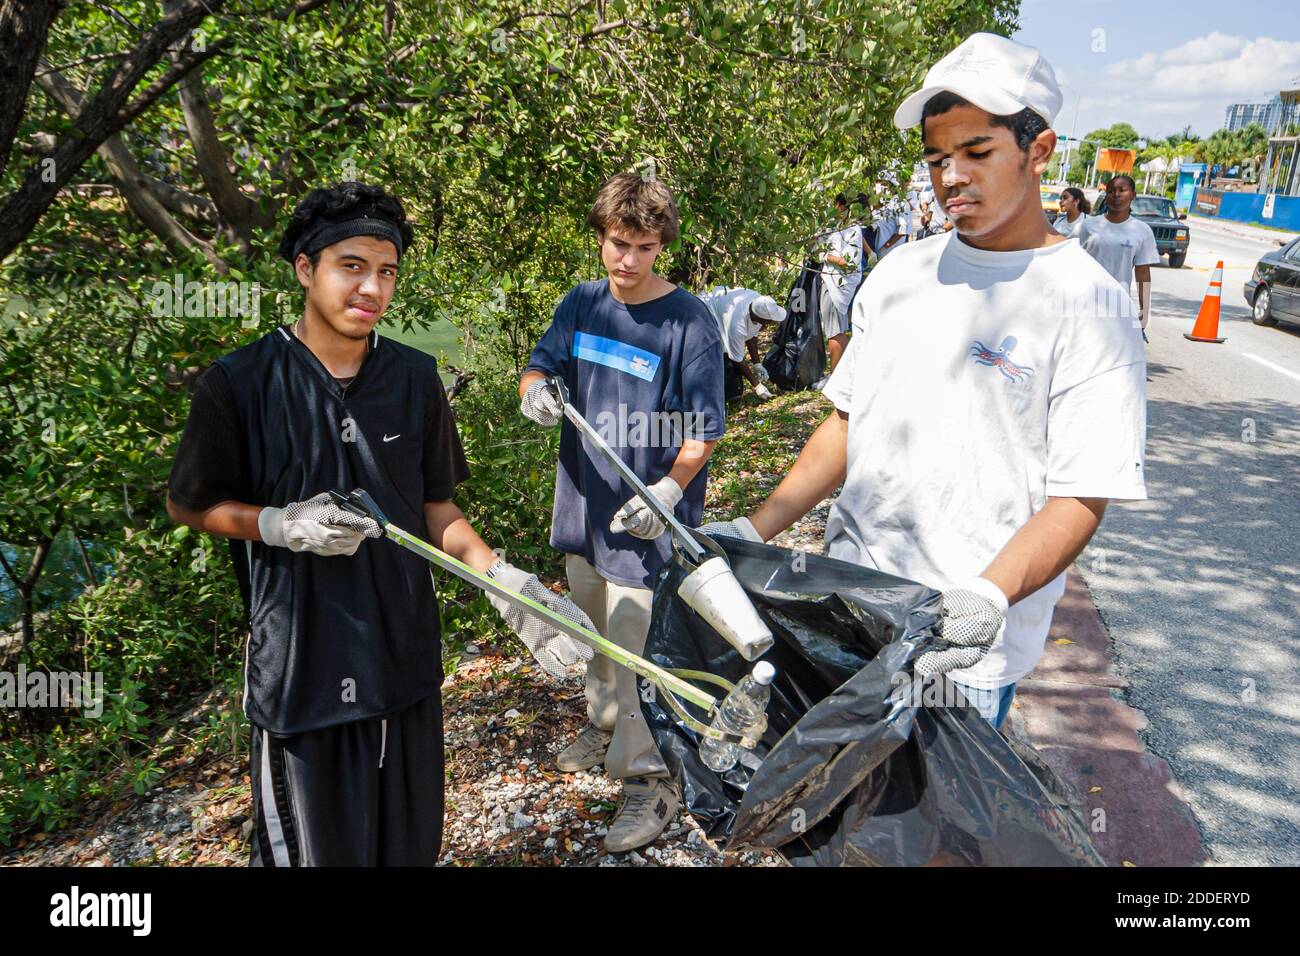 Miami Beach Florida,Dade Canal teen teens student students,Job Corps workers volunteers Black Hispanic cleaning collecting collect trash,boys plastic Stock Photo